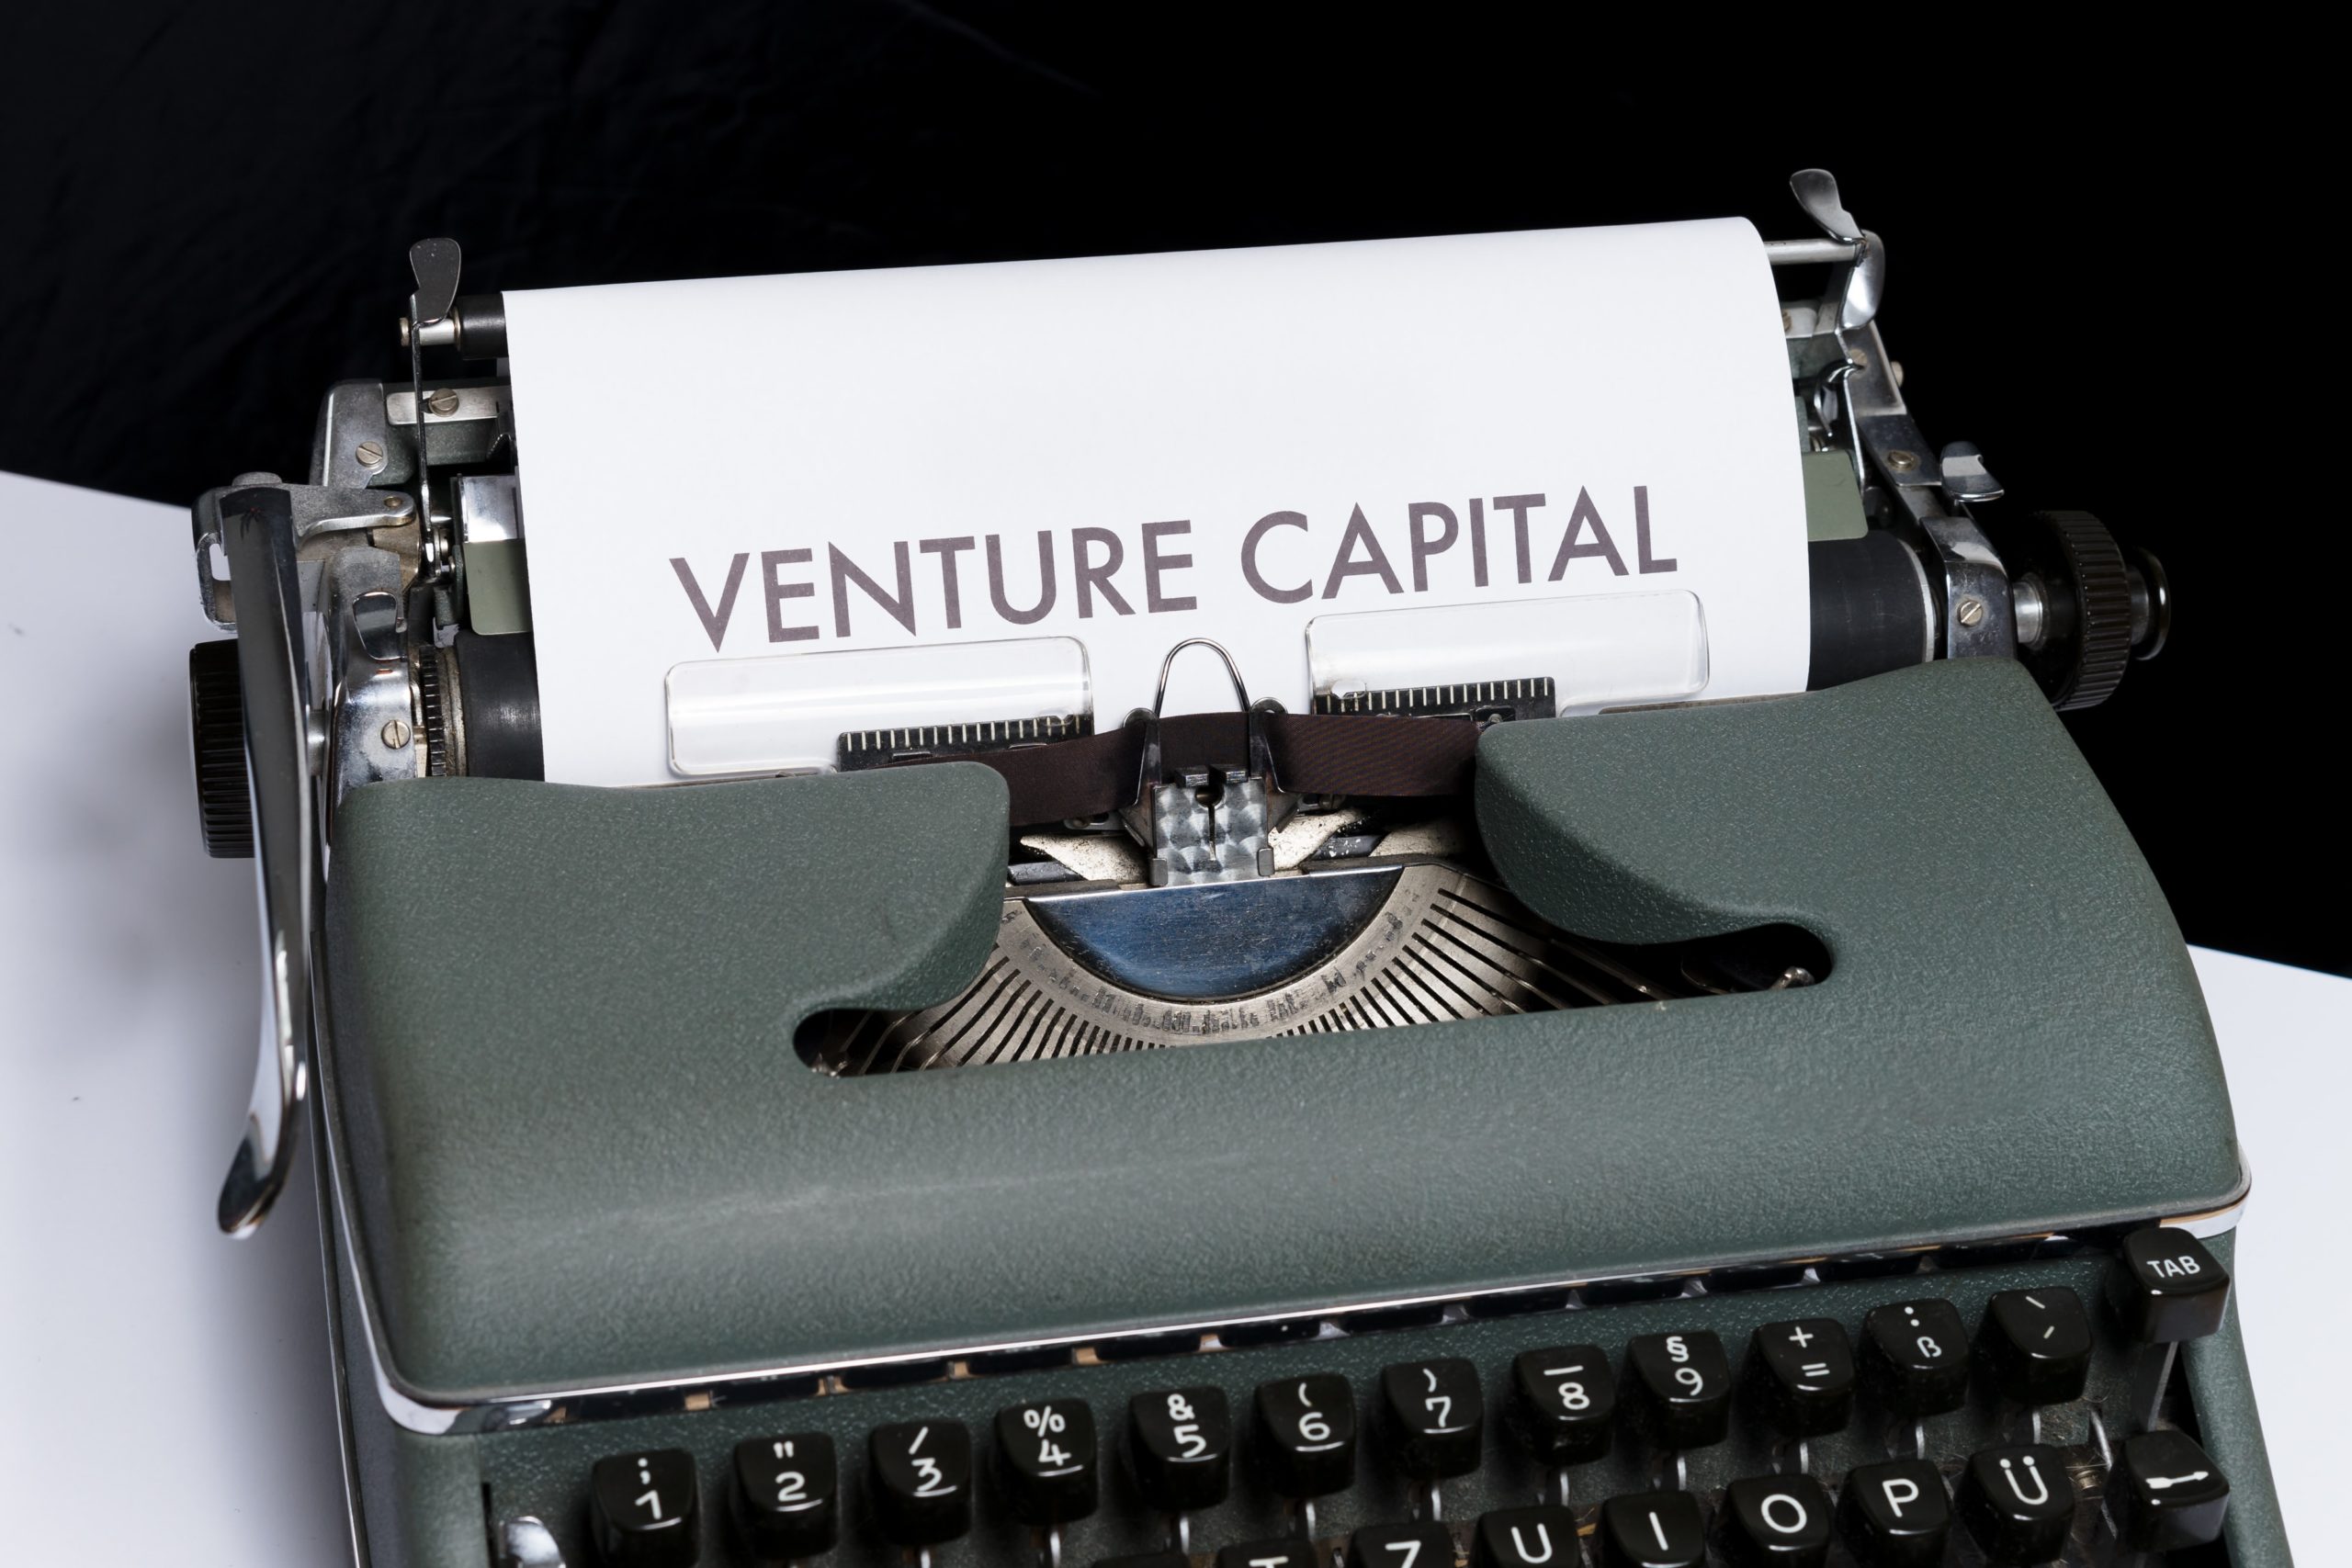 Venture capital typed on paper with a typewriter